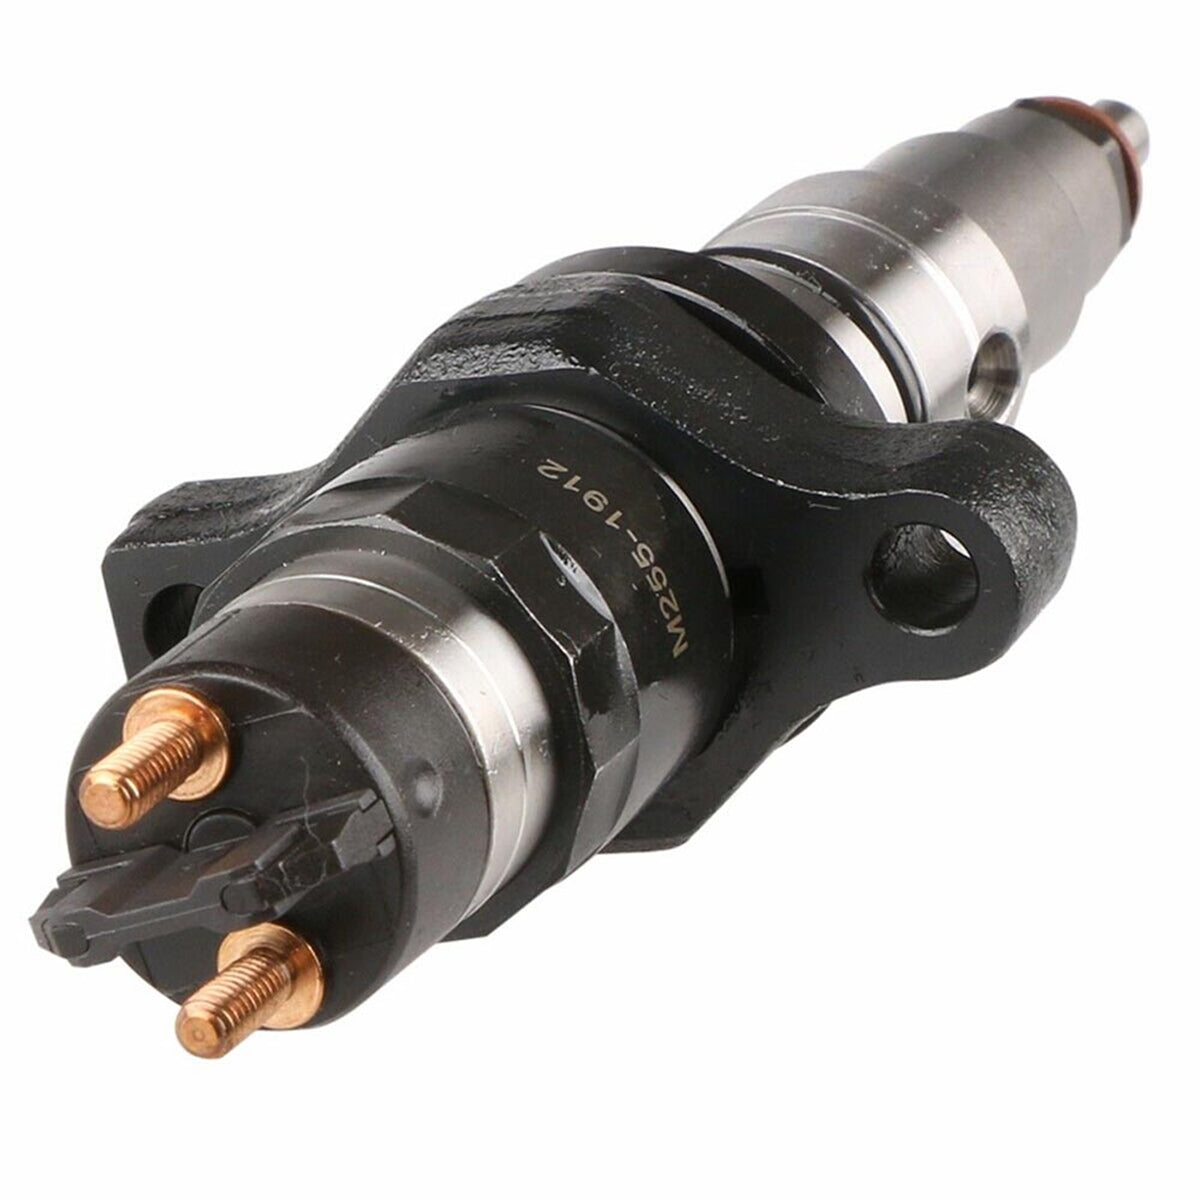 Fuel Injector 0445120255 0986435503,  Fuel Injector for 2003-2004 Dodge, Daysyore Fuel Injector, Auto Fuel Injector, Car Fuel Injector